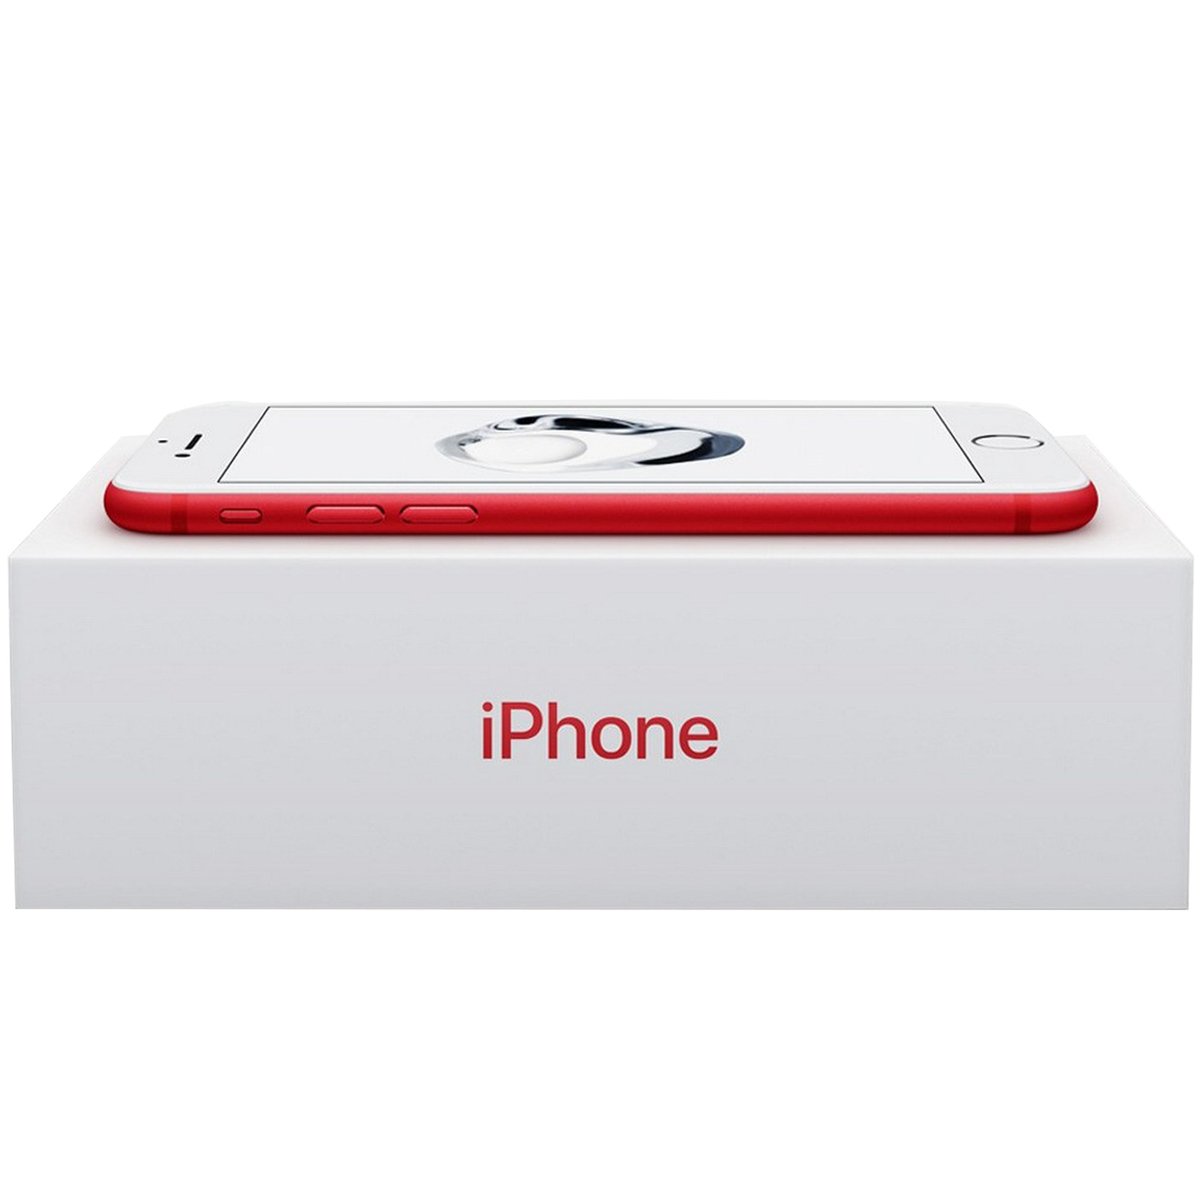 Apple iPhone 7 128GB Special Edition Product Red